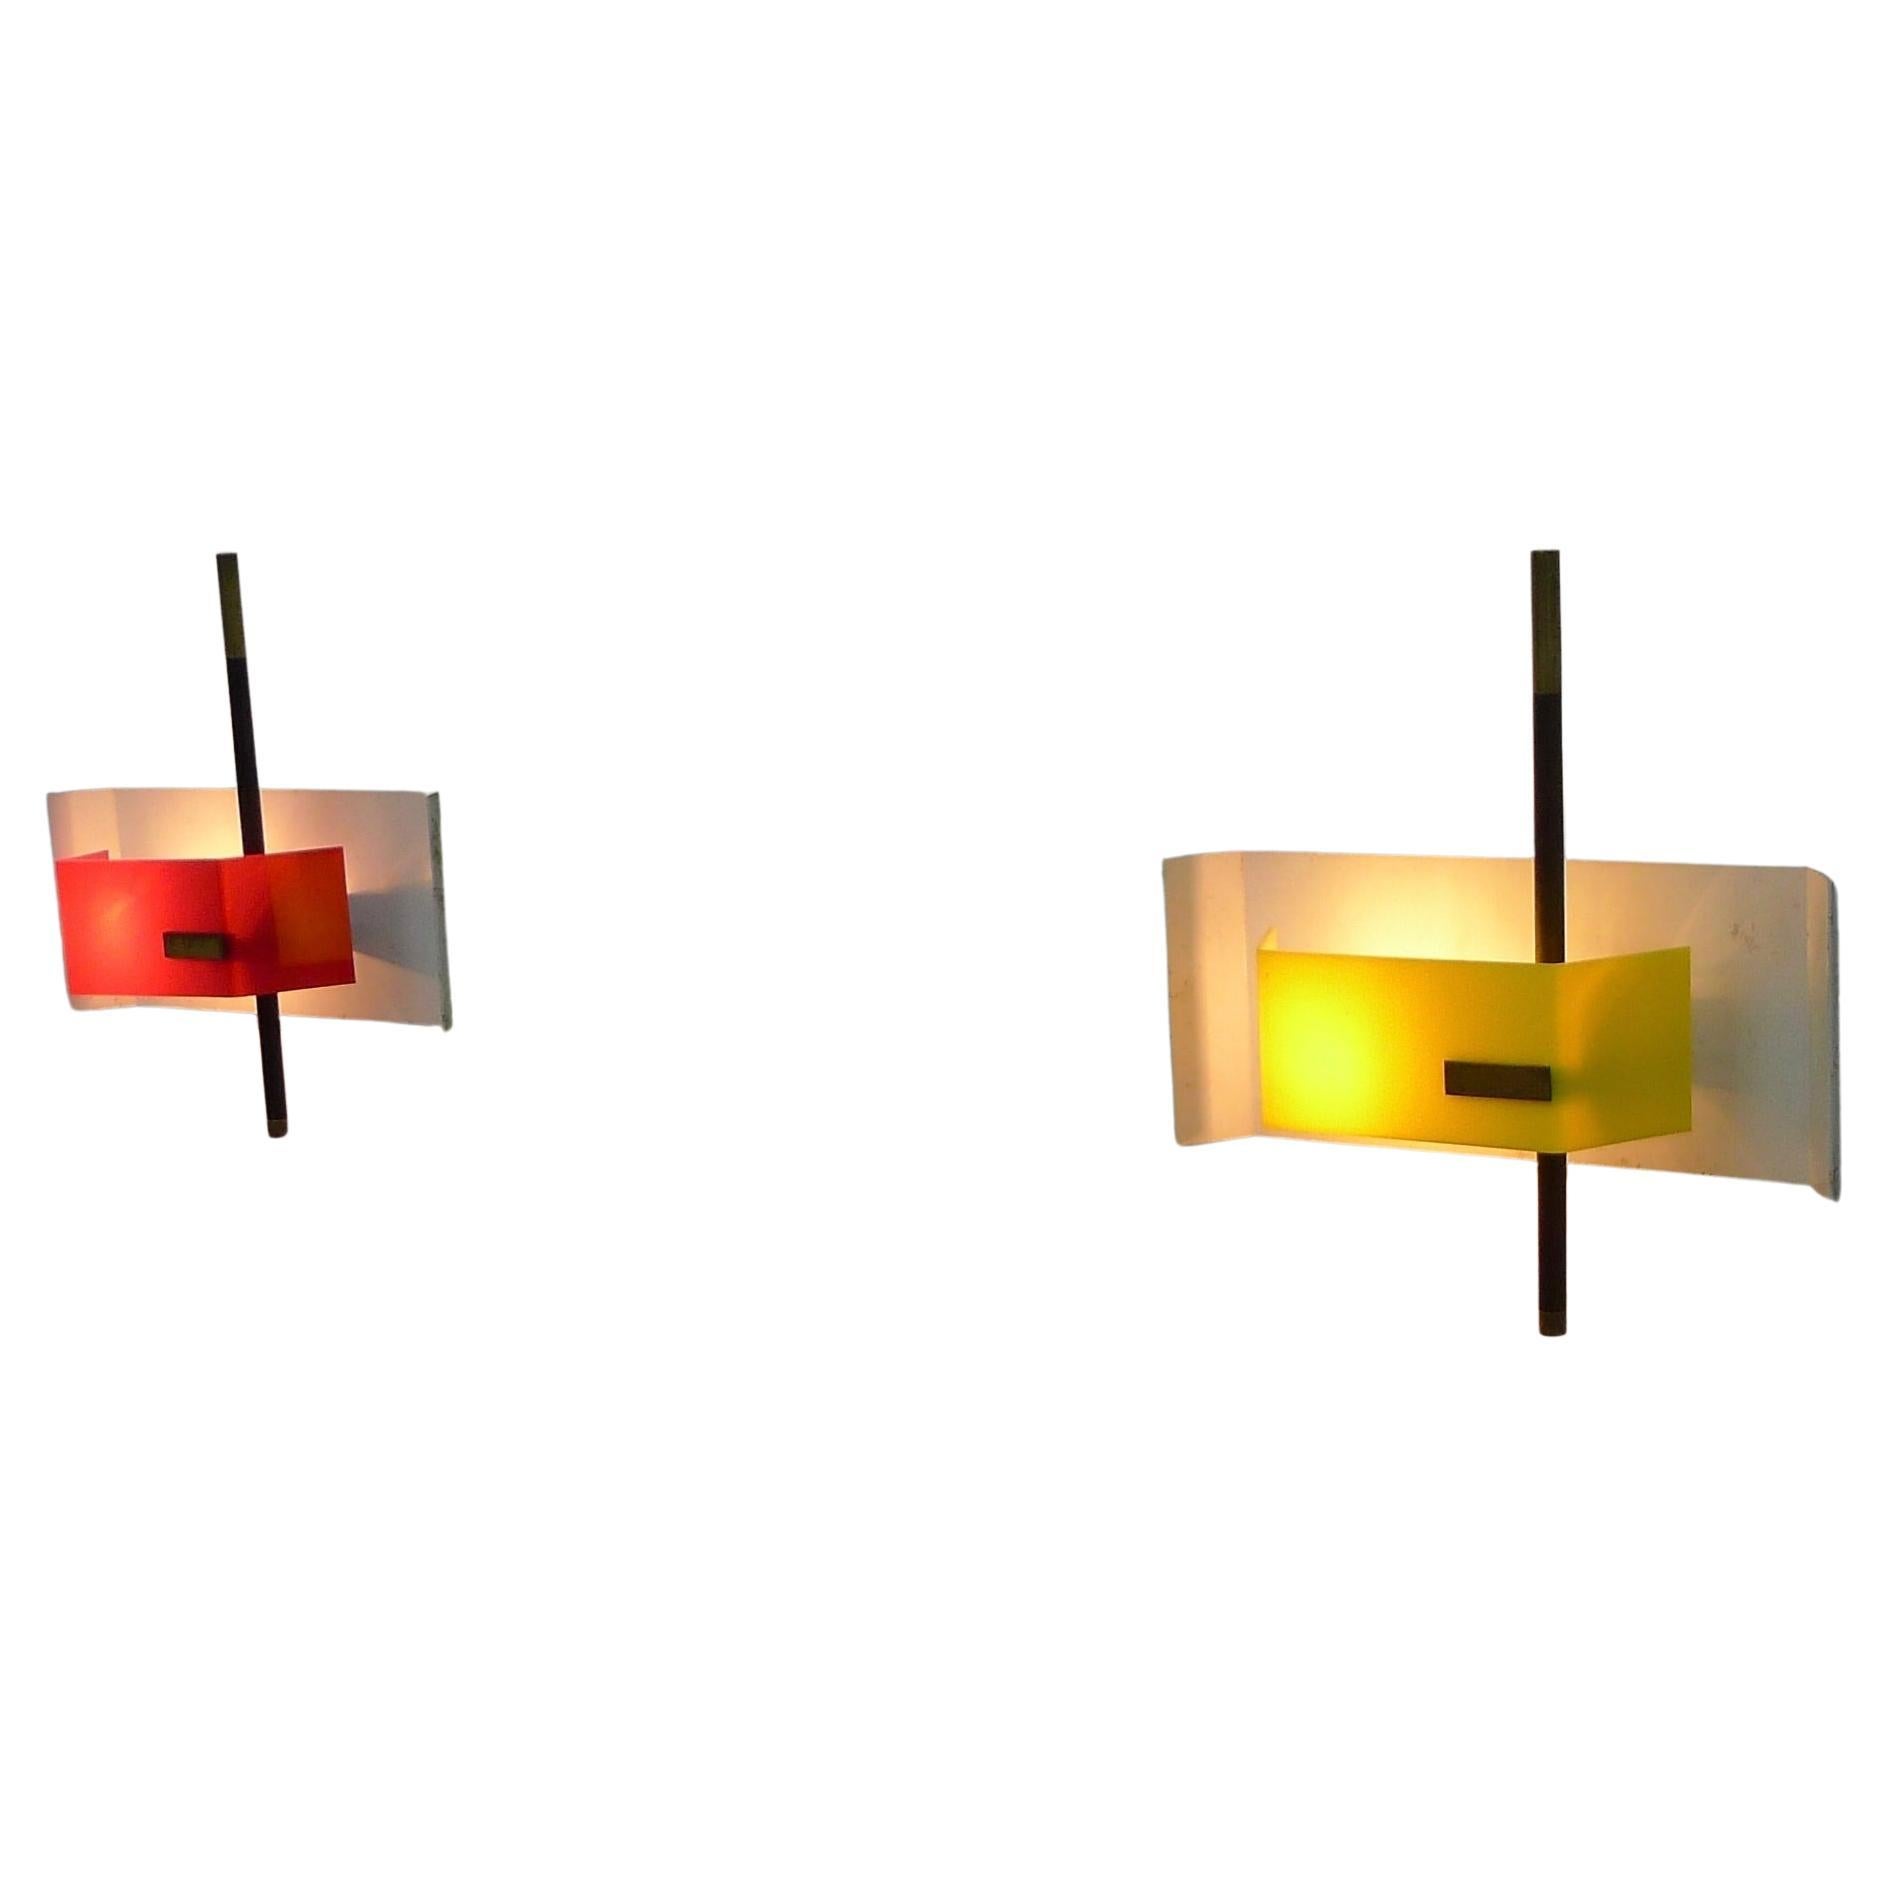 Stilnovo Red and Yellow Wall Lights, 1950s For Sale